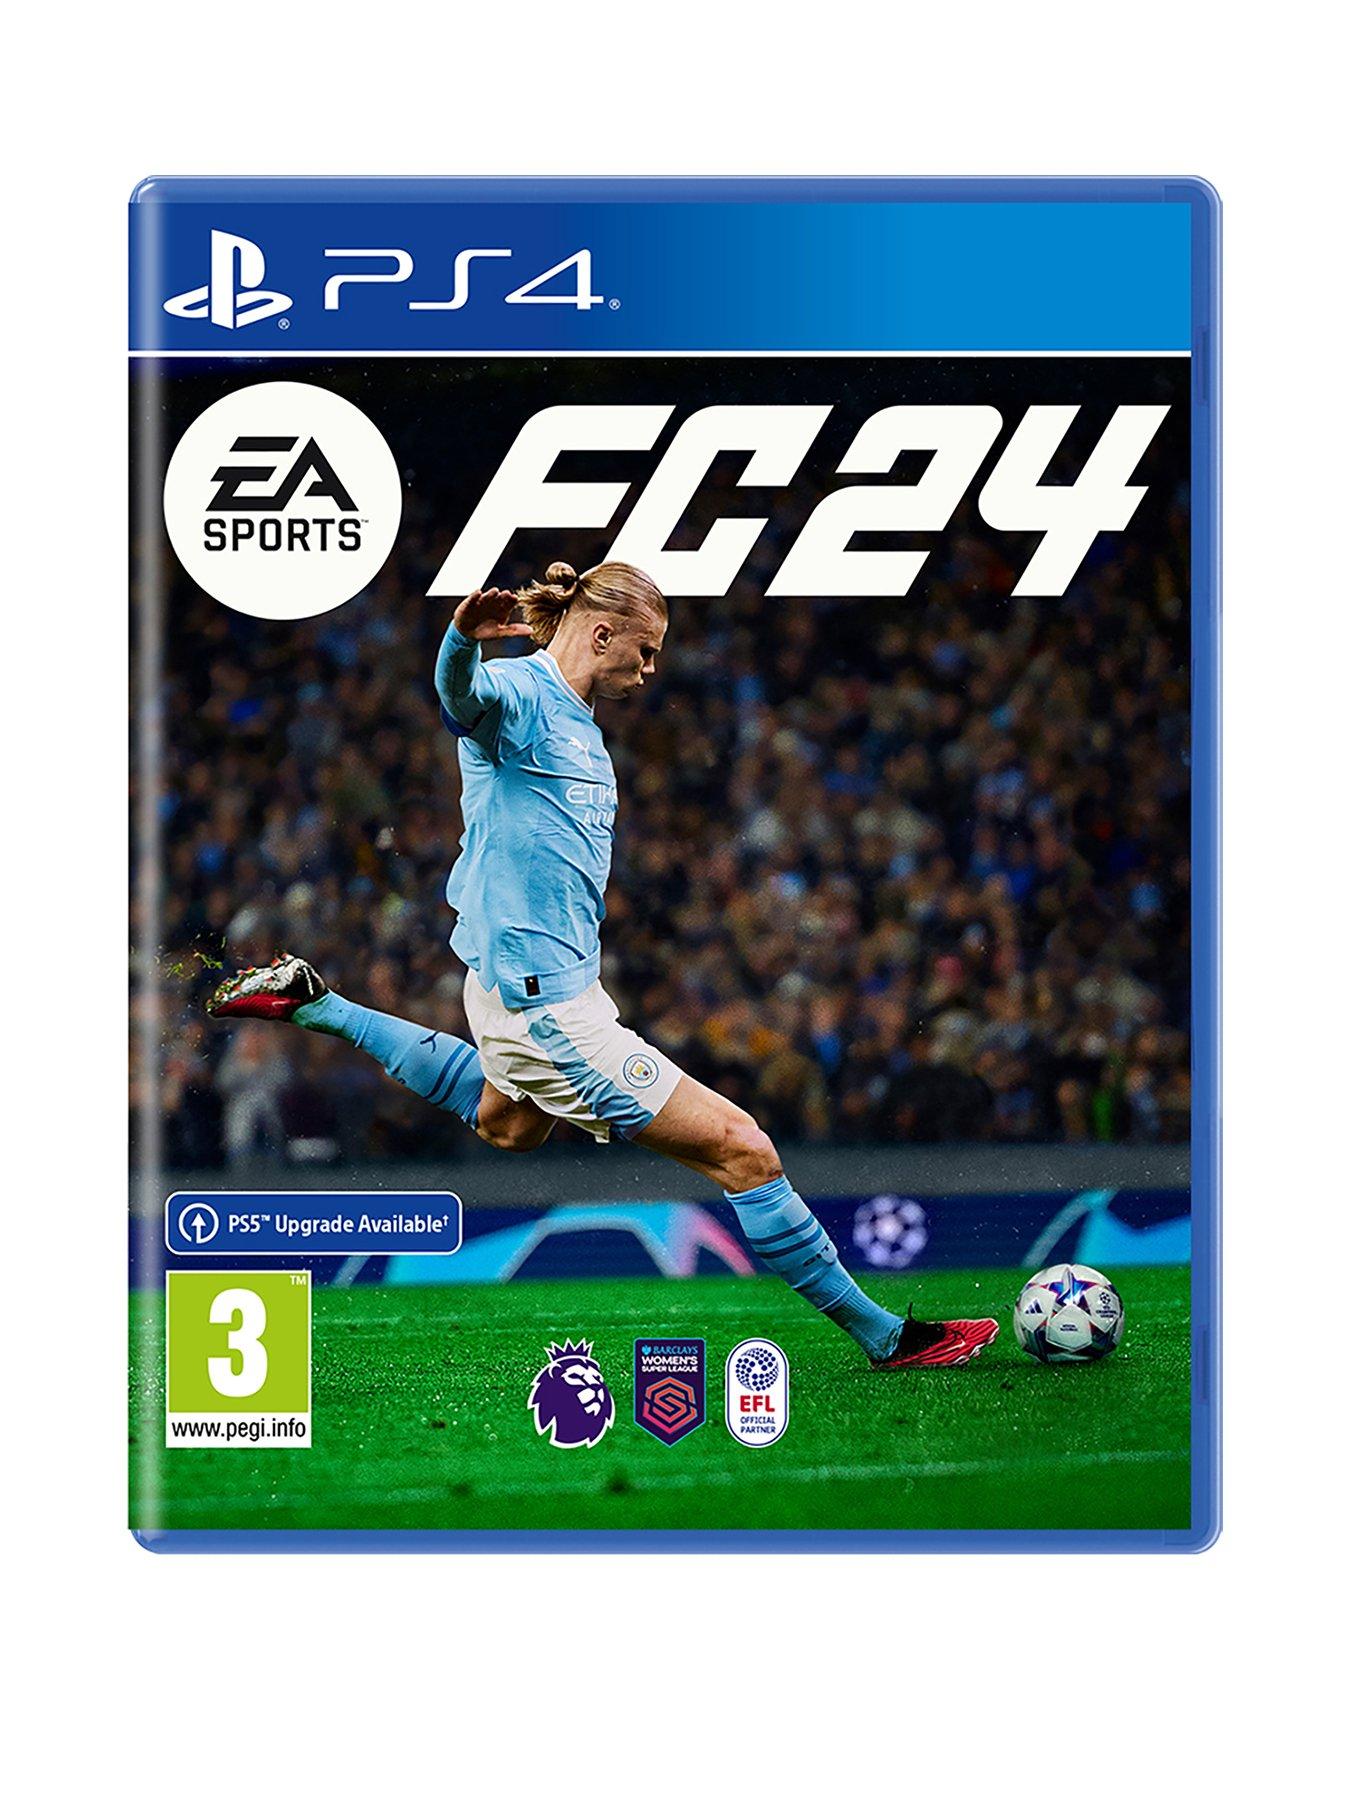 Sony PlayStation 4 EA SPORTS FIFA 23 PS4 Game Deals for Platform  PlayStation4 PS4 PlayStation5 PS5